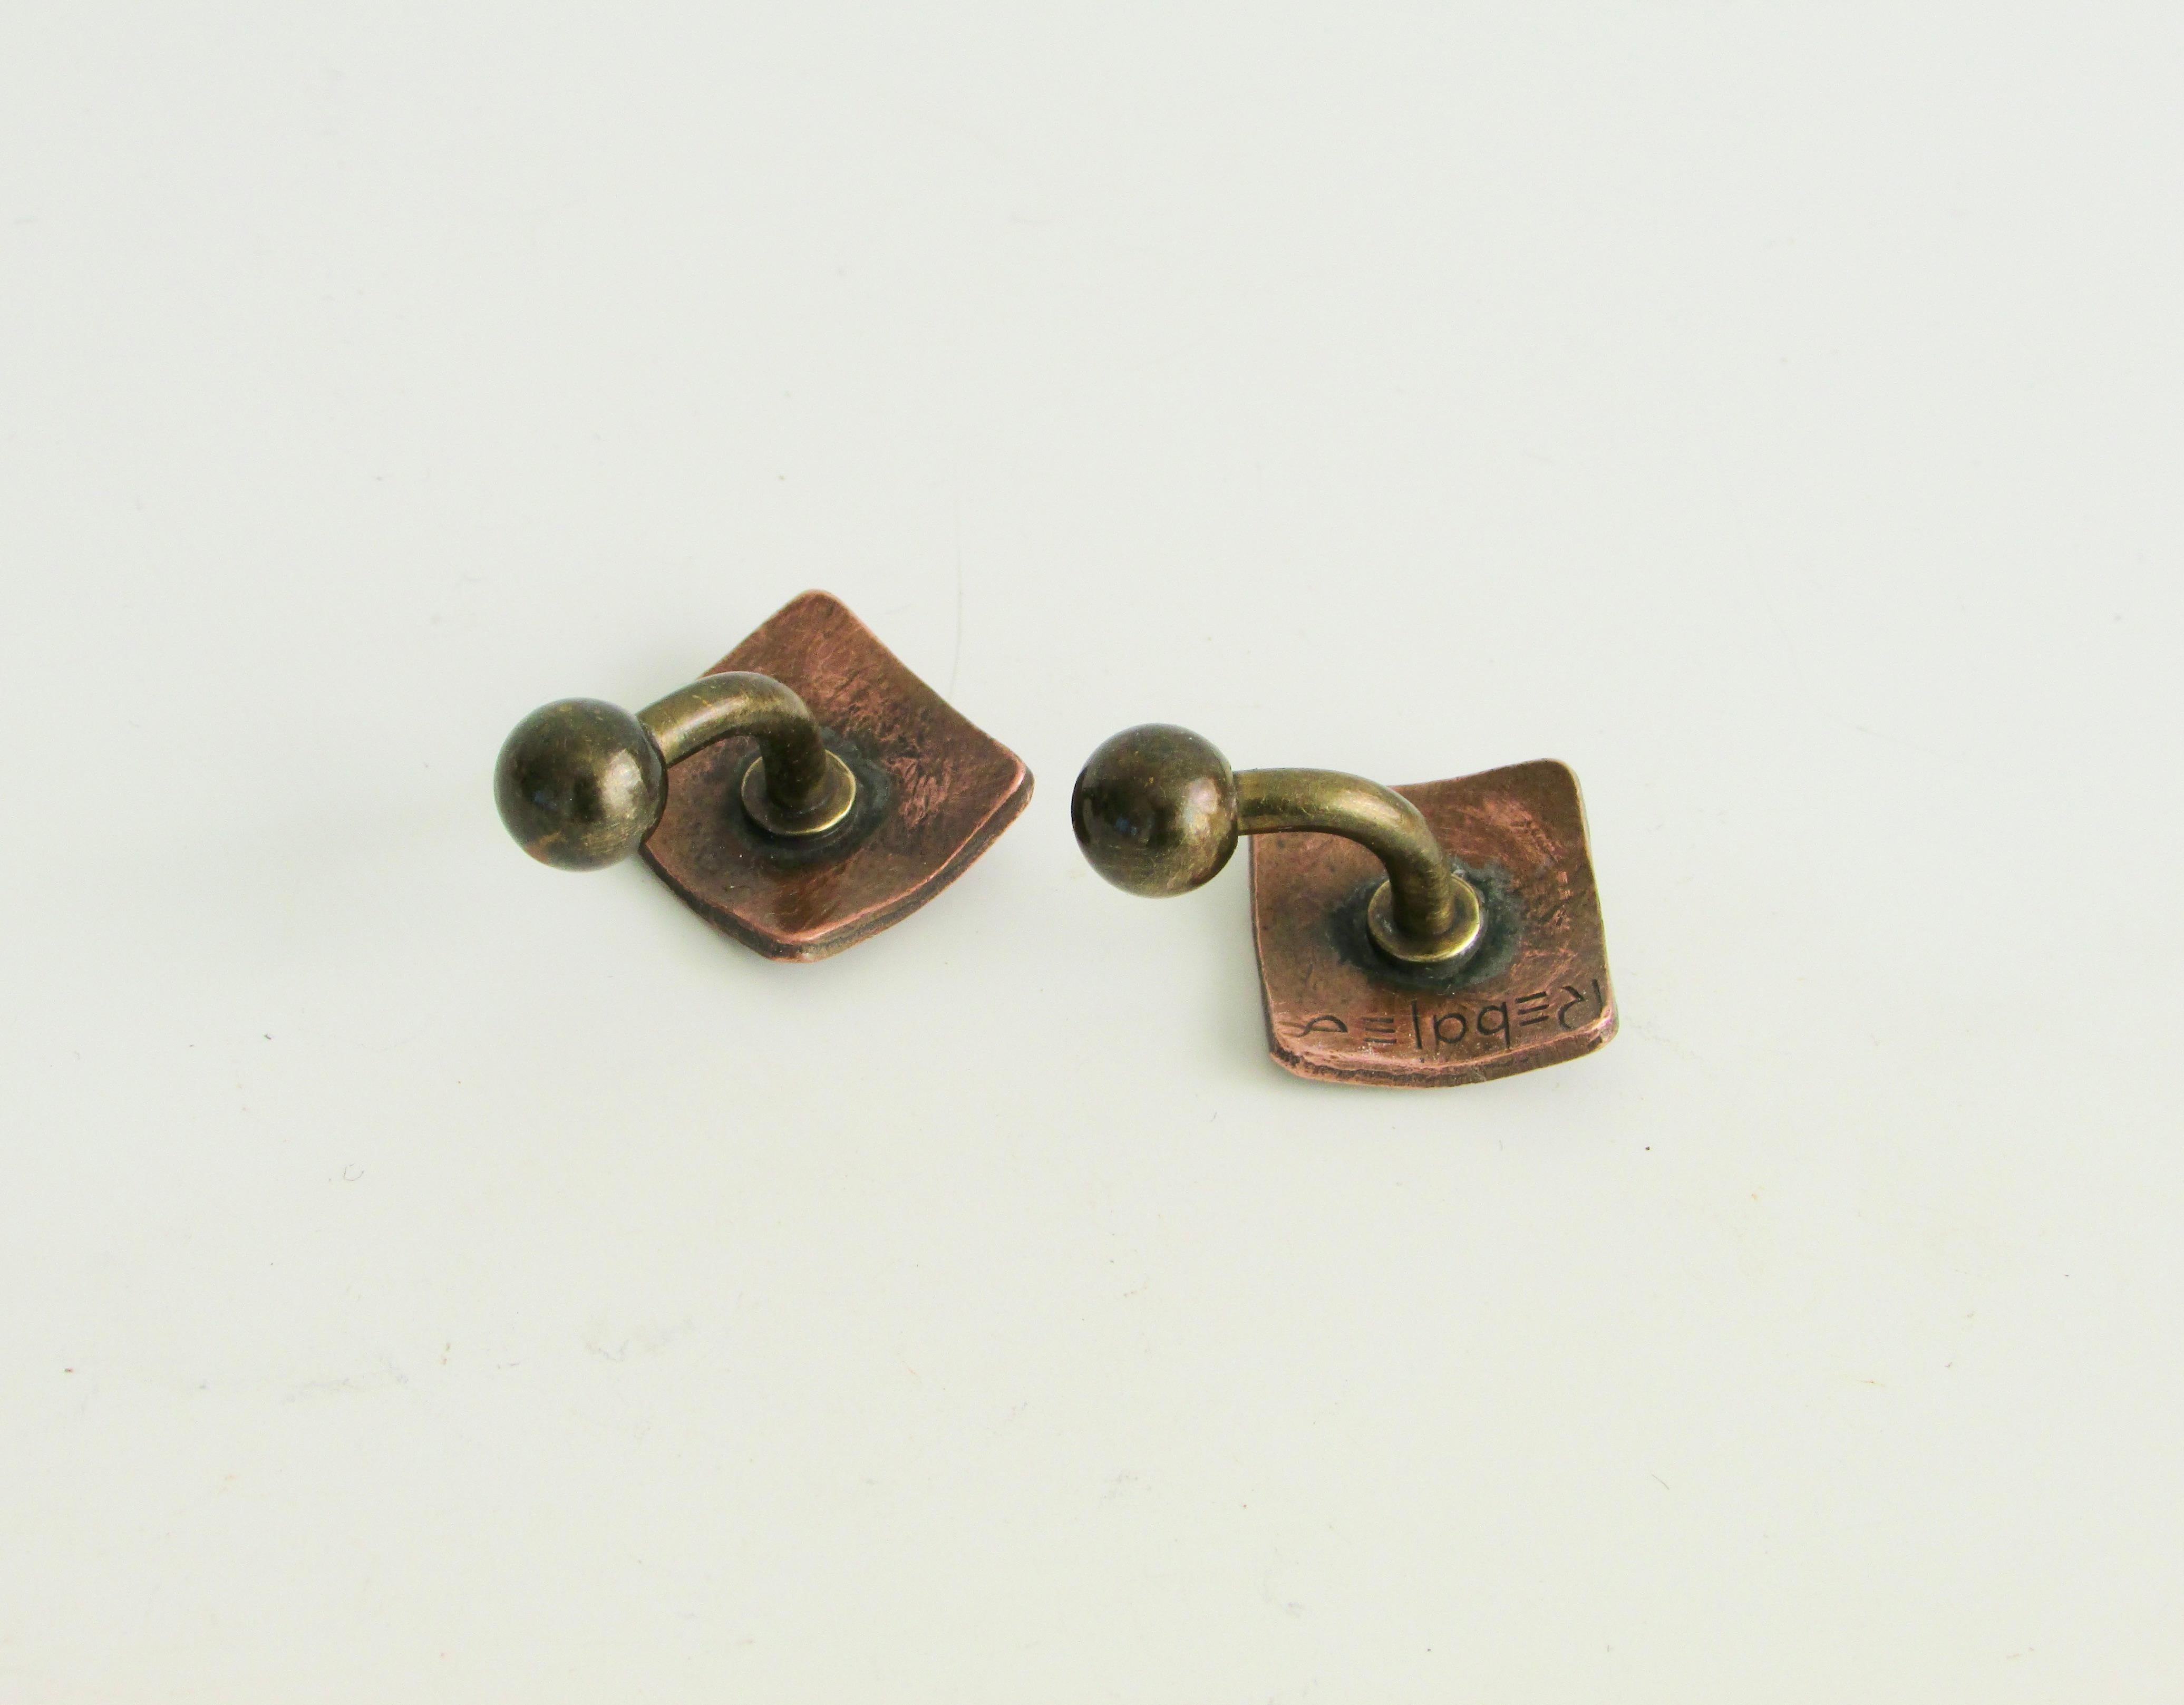 American Pair of Greenwich Village artist Rebaje Hammered Copper and Brass Cuff Links For Sale